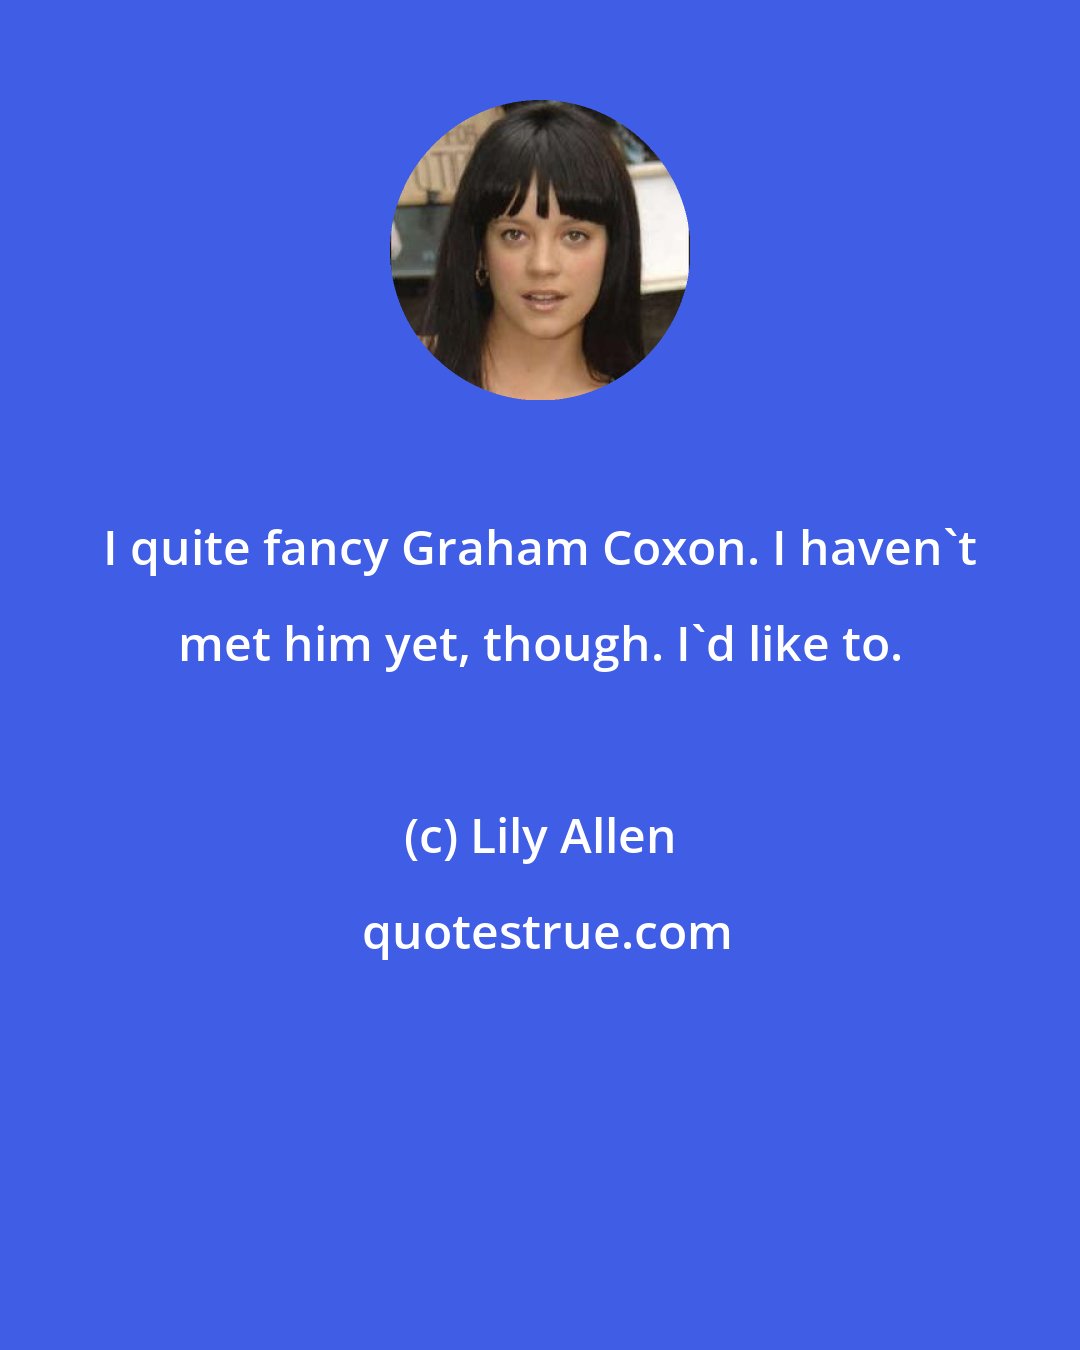 Lily Allen: I quite fancy Graham Coxon. I haven't met him yet, though. I'd like to.